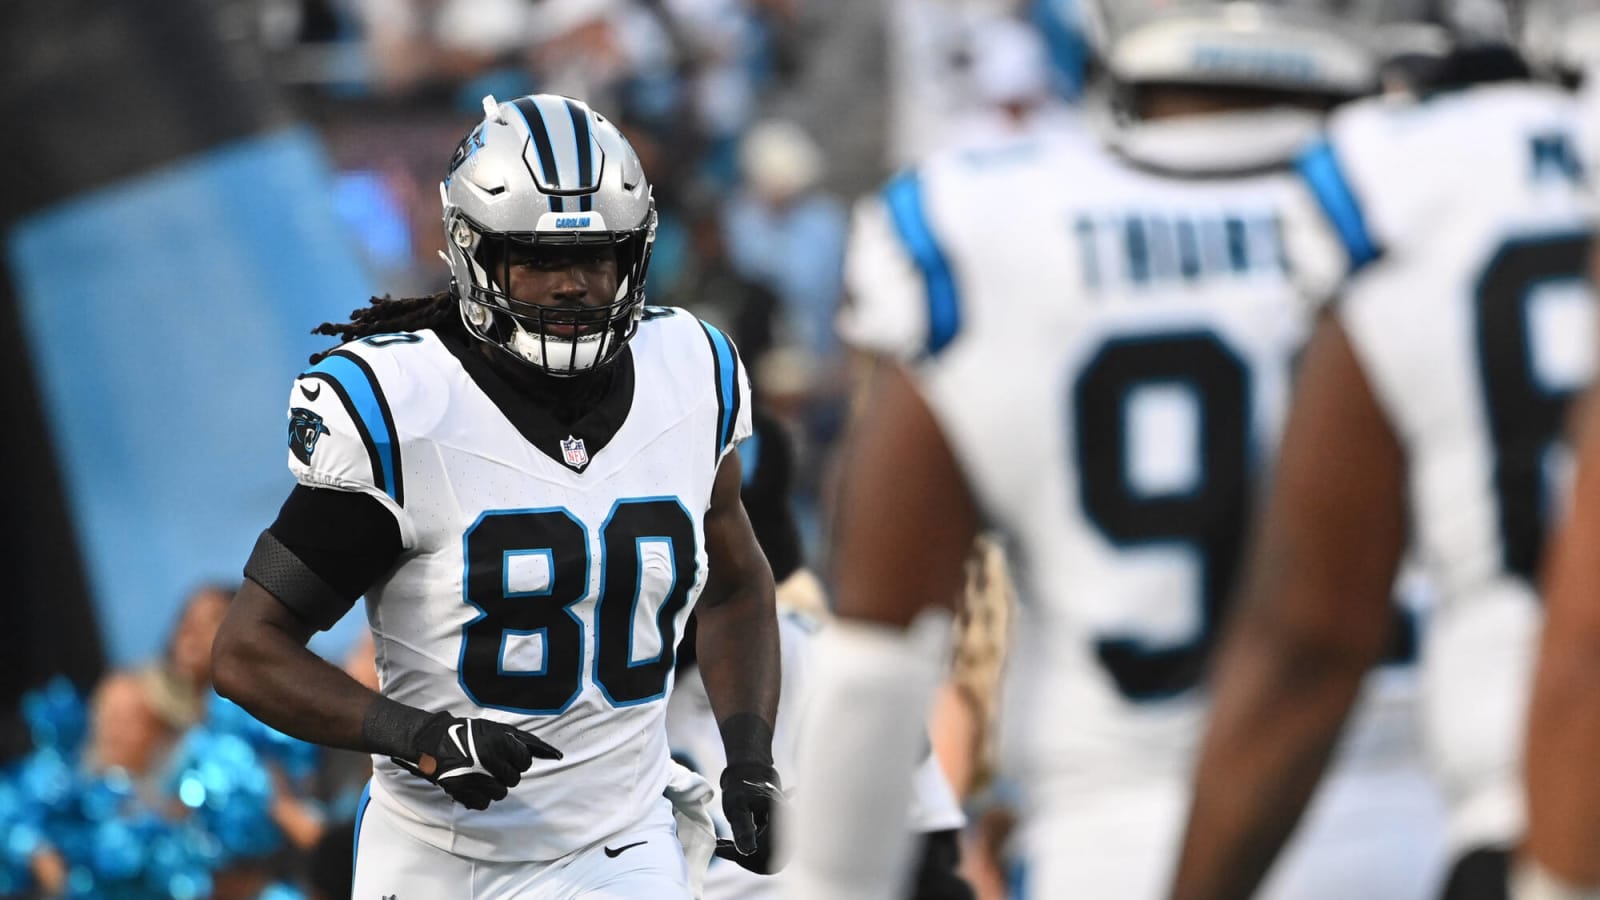 The Carolina Panthers Have Designated Blocking Tight End for Return from Injured Reserve. He Hasn’t Played Since Week 5.